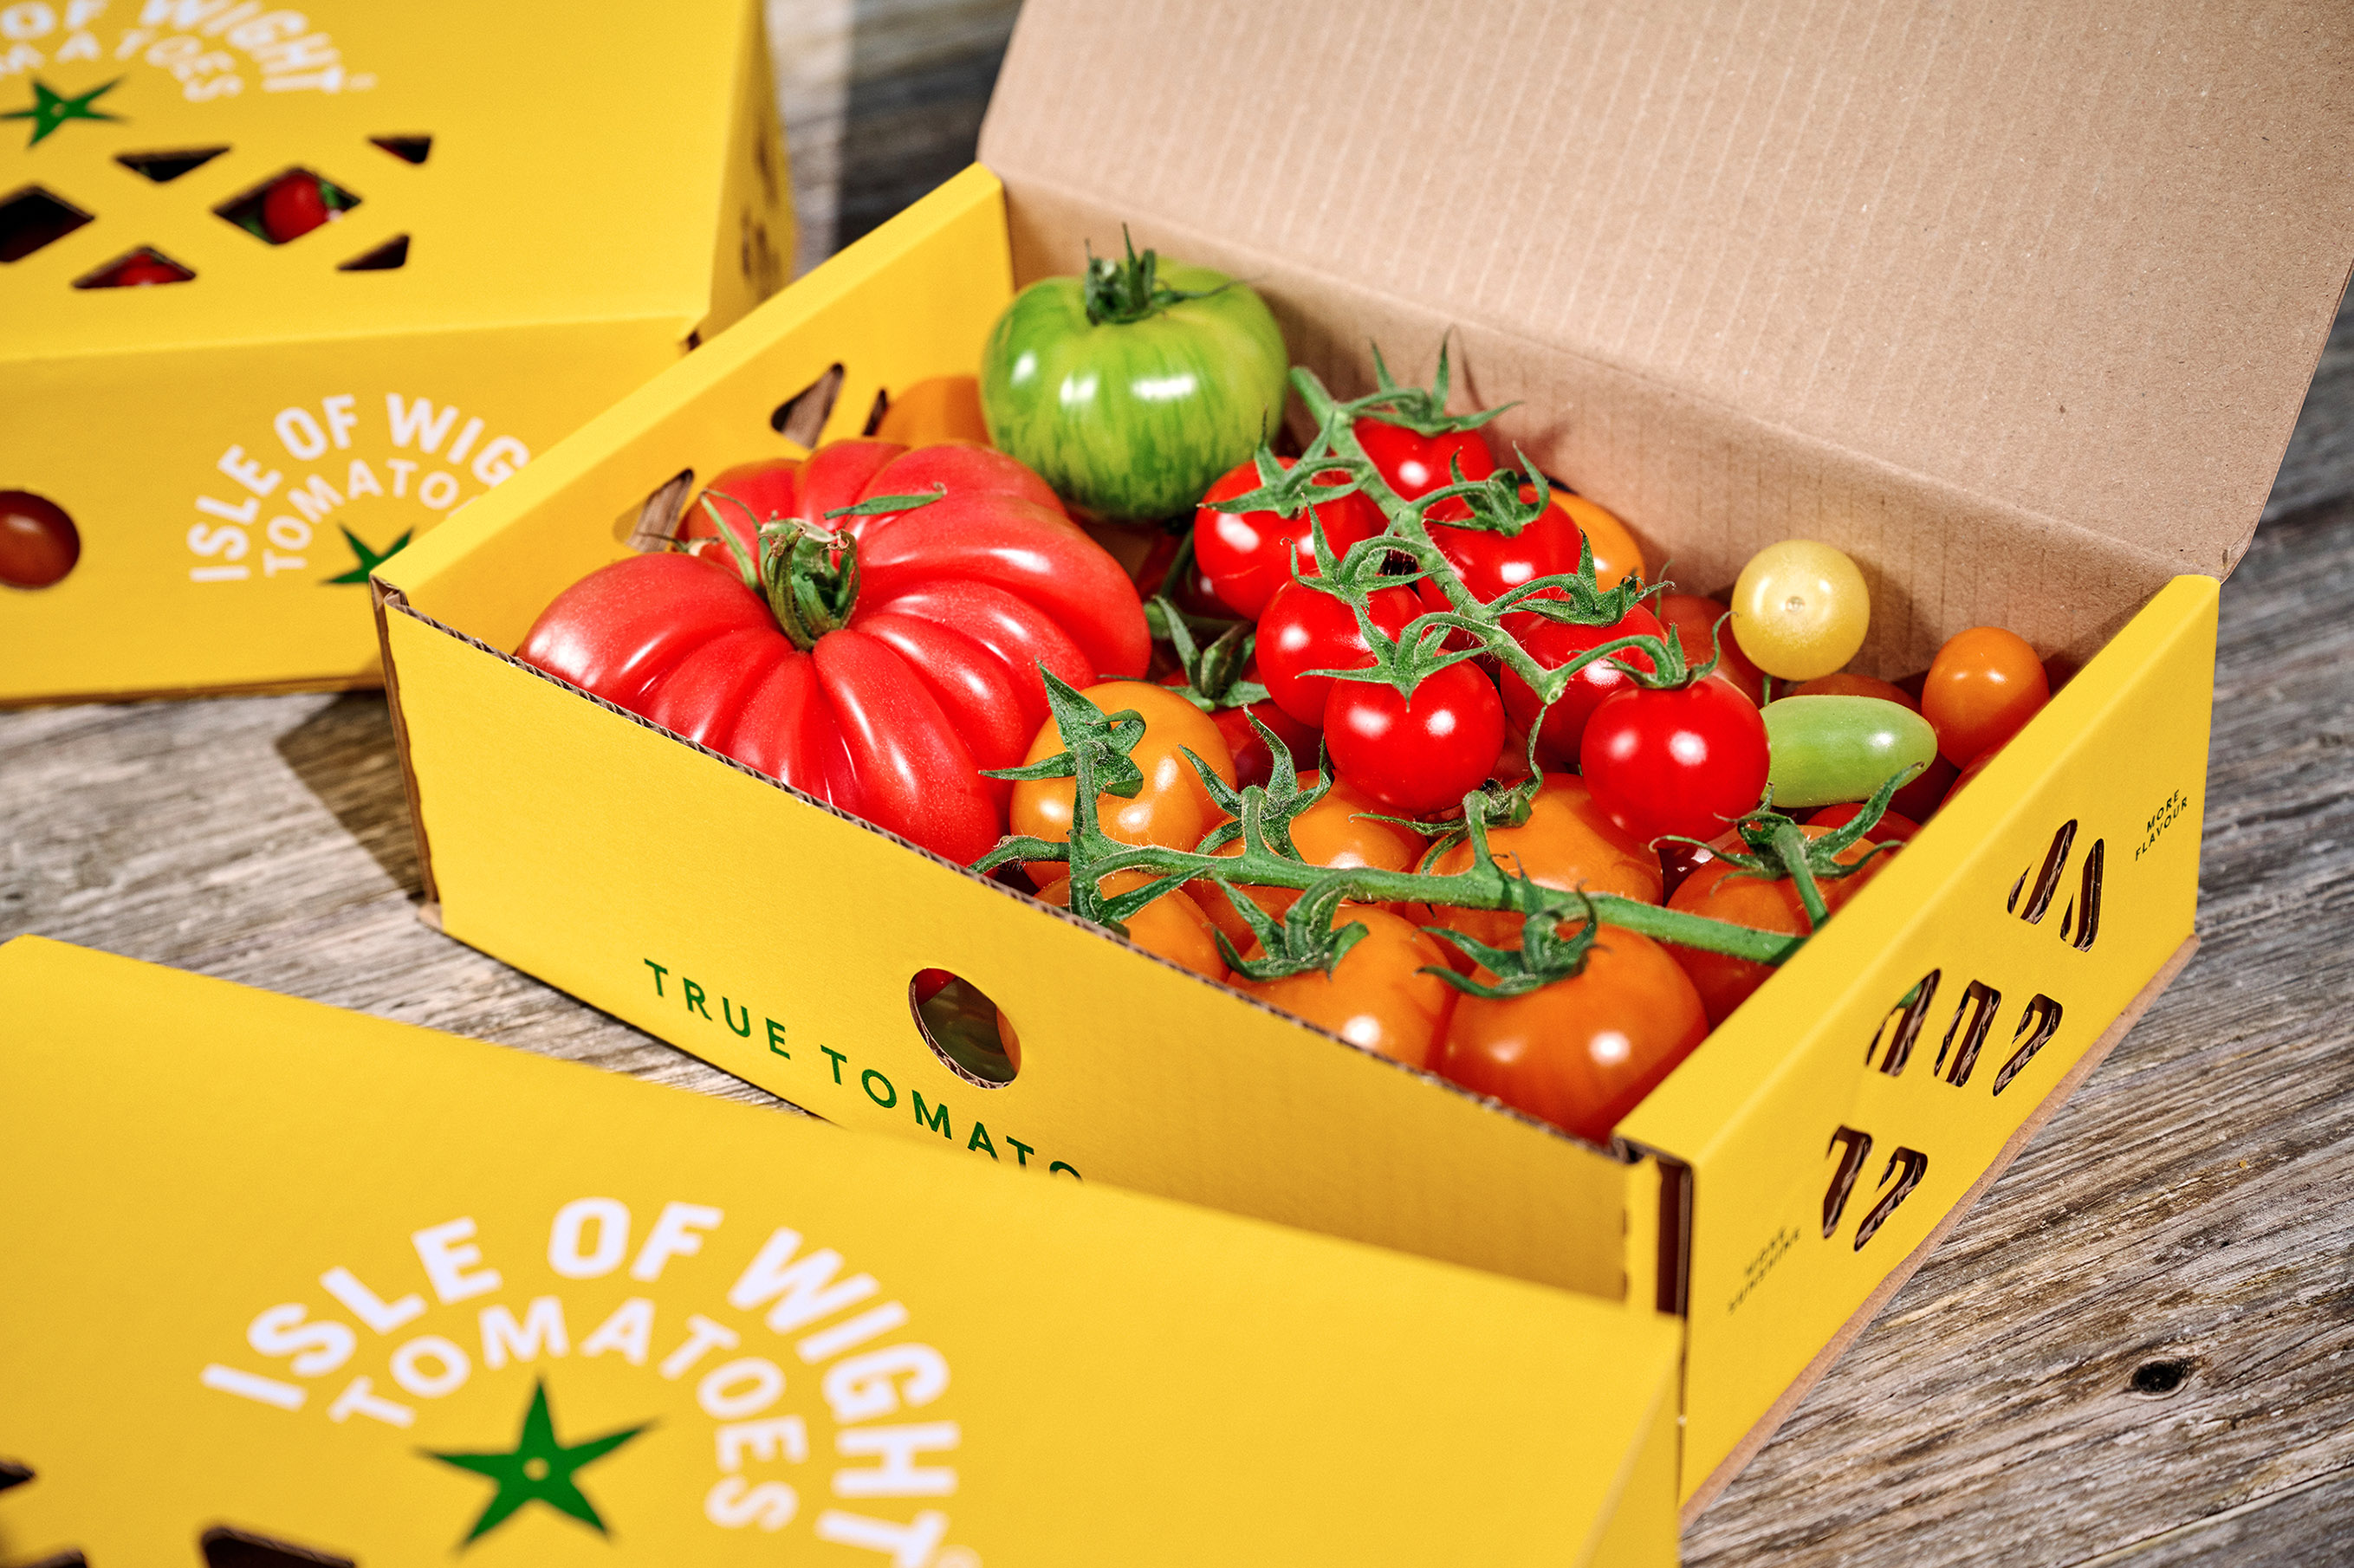 B&B Studio Reimagines The Tomato Stall As Isle Of Wight Tomatoes, Putting The Focus On Provenance With A New Brand Positioning, Identity And Packaging Design